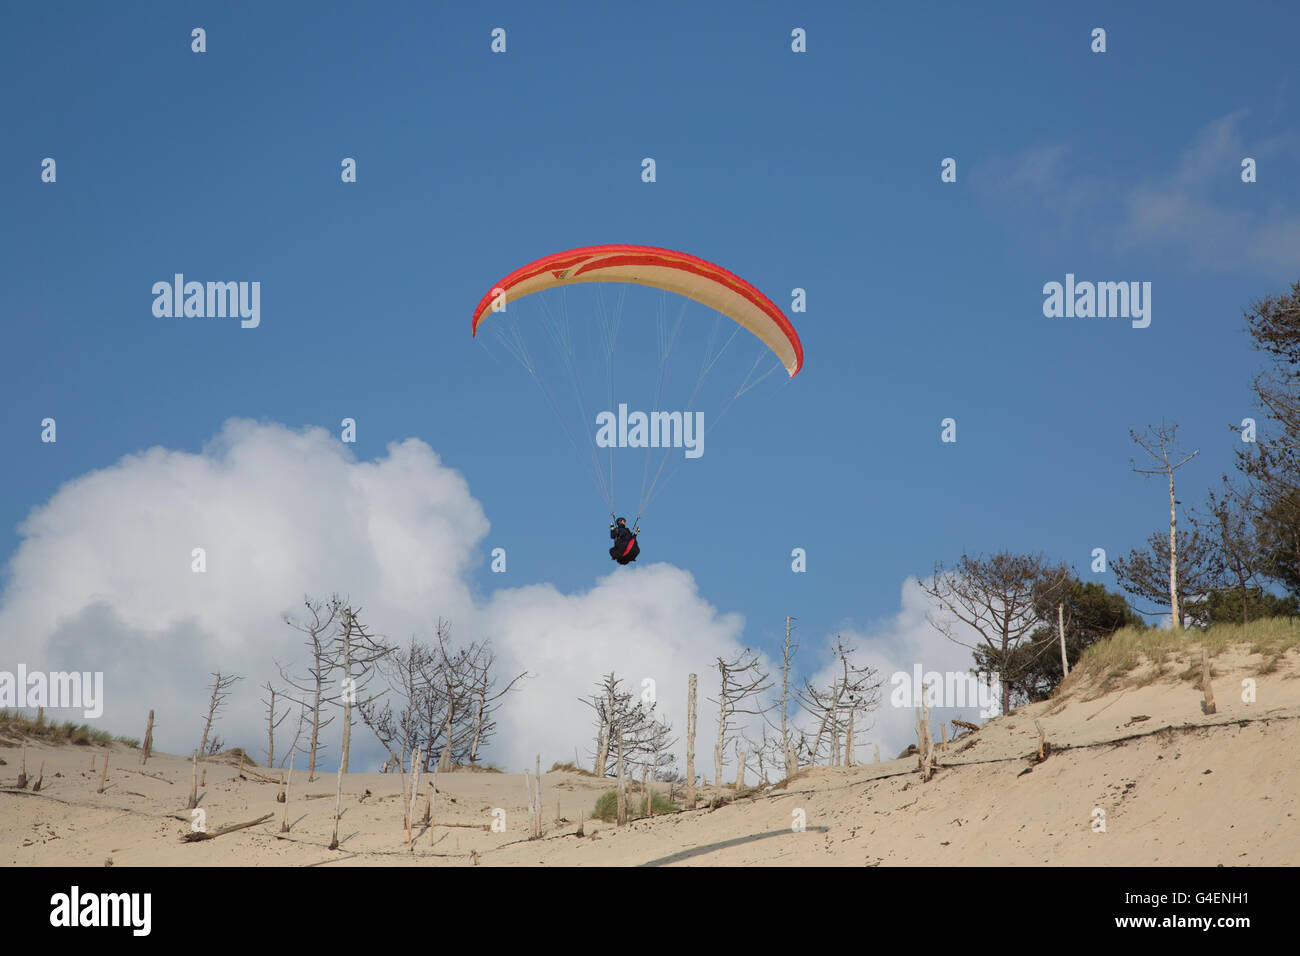 Paraglider flying over dead trees on sand dunes Dune of Pyla Southern France Stock Photo